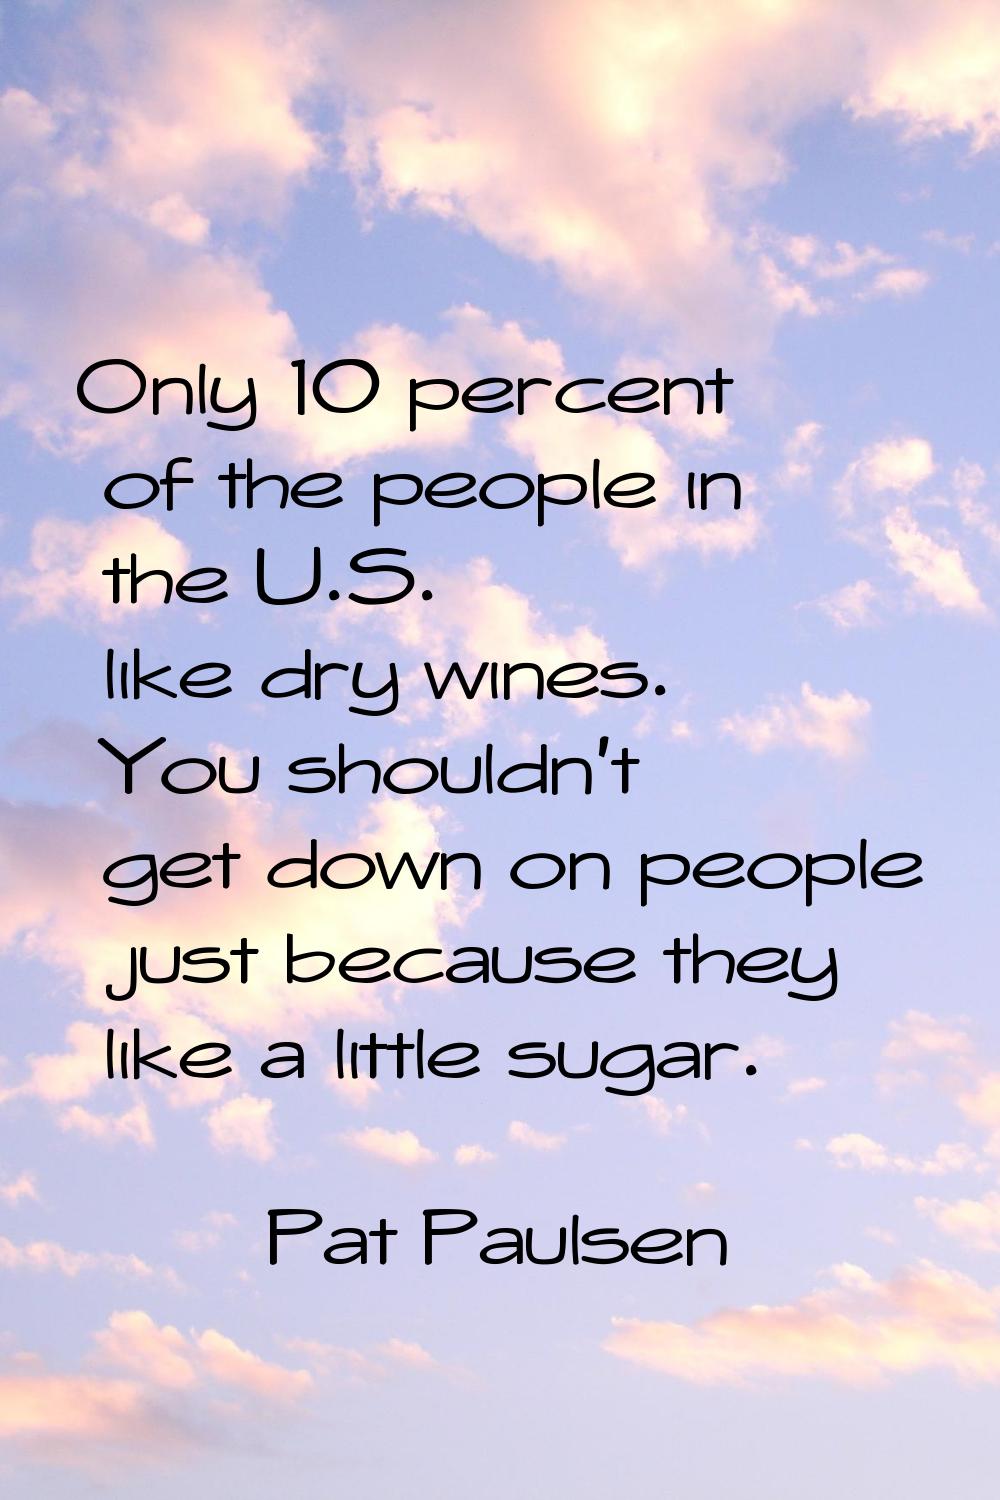 Only 10 percent of the people in the U.S. like dry wines. You shouldn't get down on people just bec